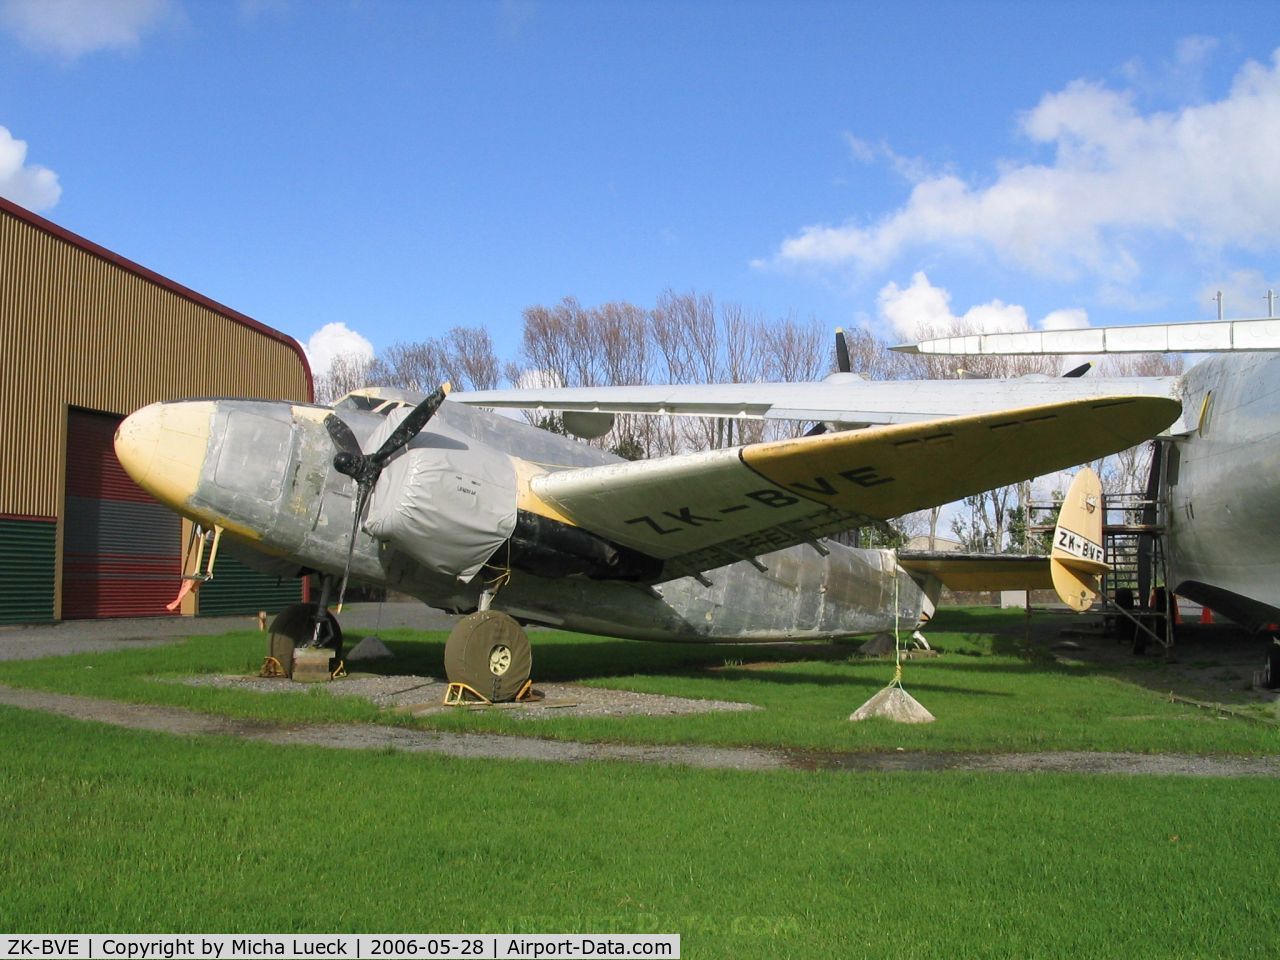 ZK-BVE, Lockheed 18-56 Lodestar C/N 2020, (c/n 2020), Lockheed L-18 Loadstar. Preserved at the Museum of Transport and Technology (MOTAT) in Auckland, New Zealand